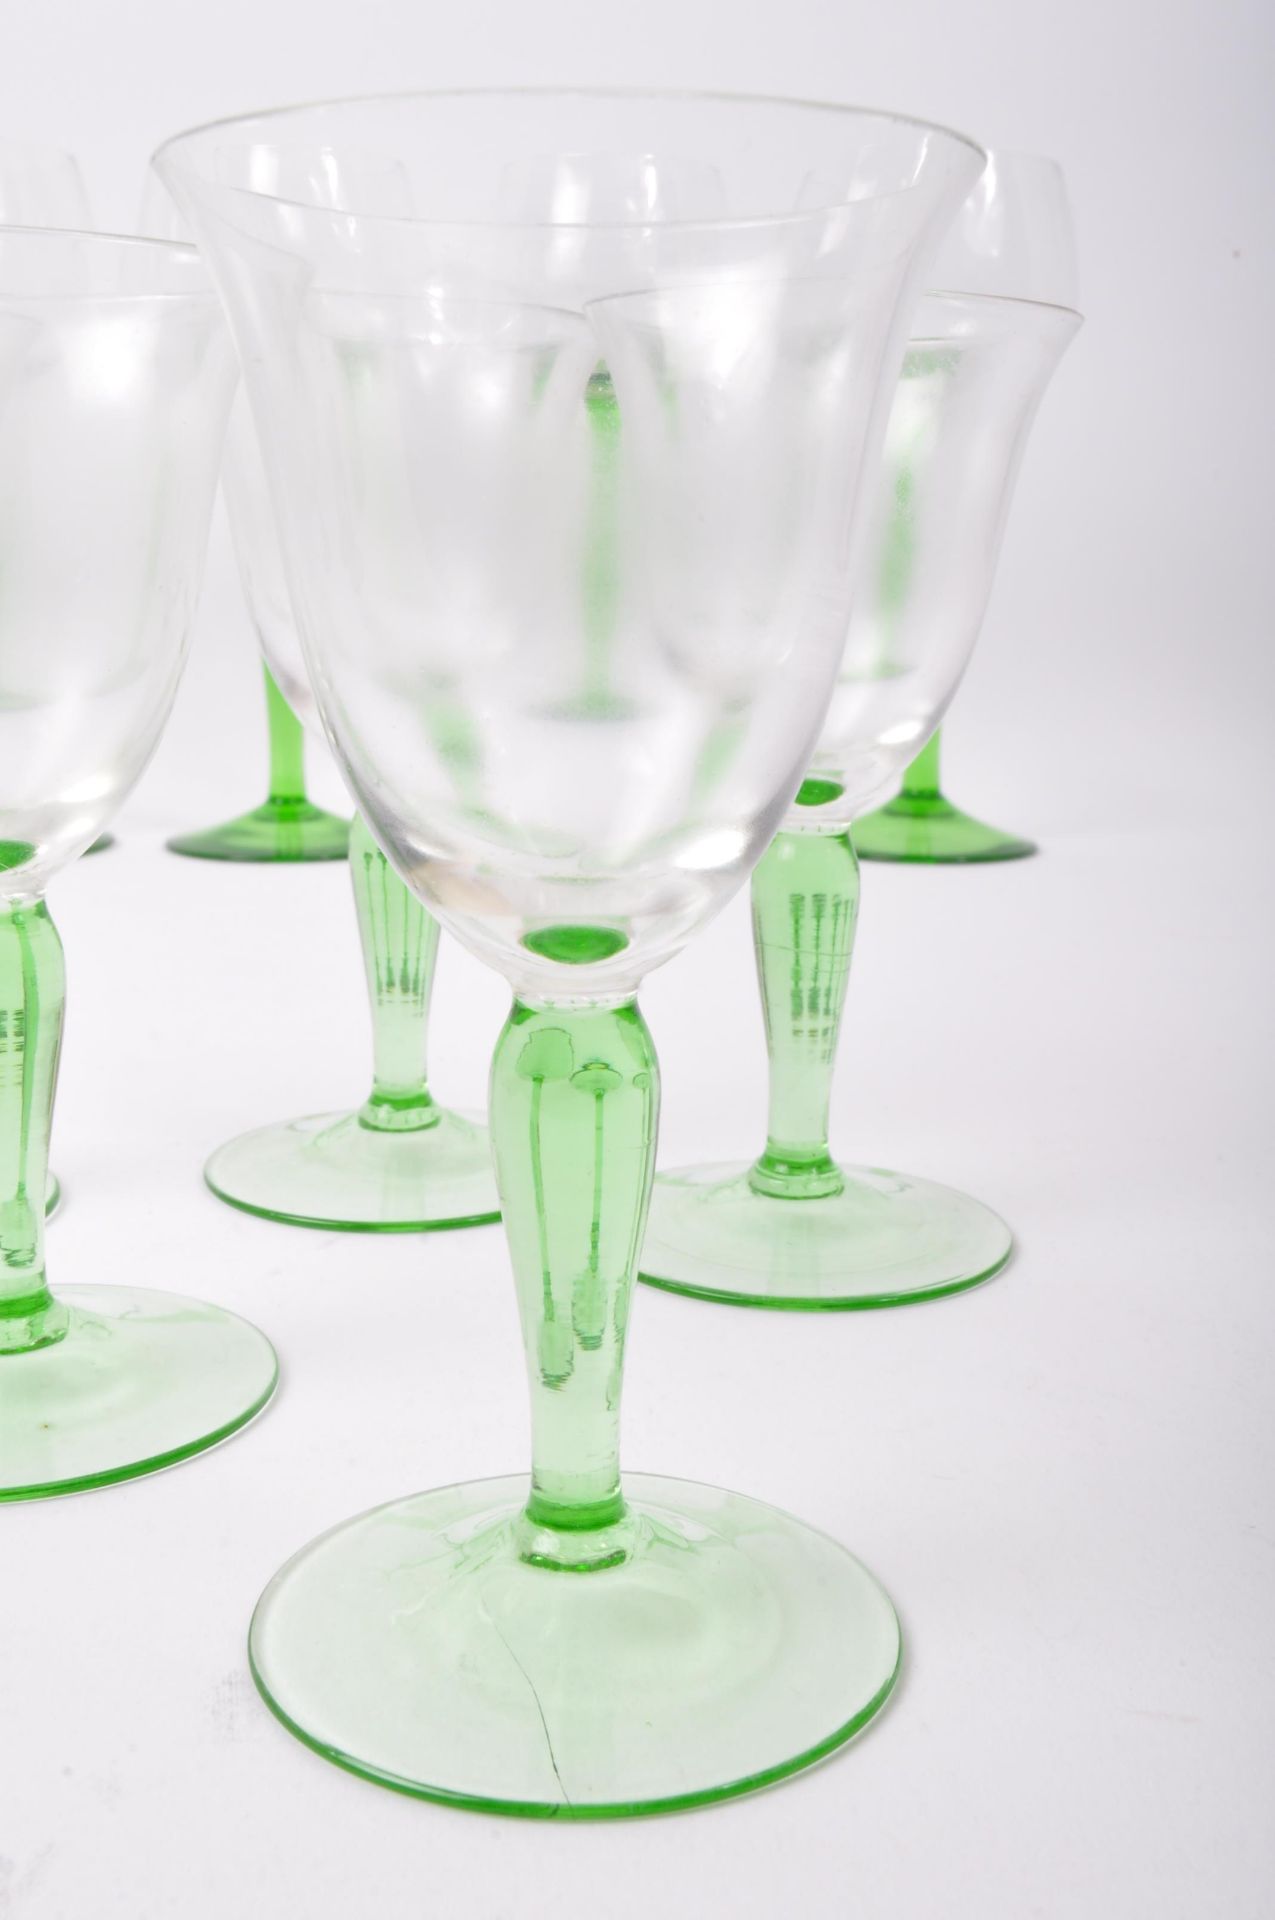 ASSORTMENT OF VINTAGE EMERALD DRINKING GLASSES - Image 4 of 5